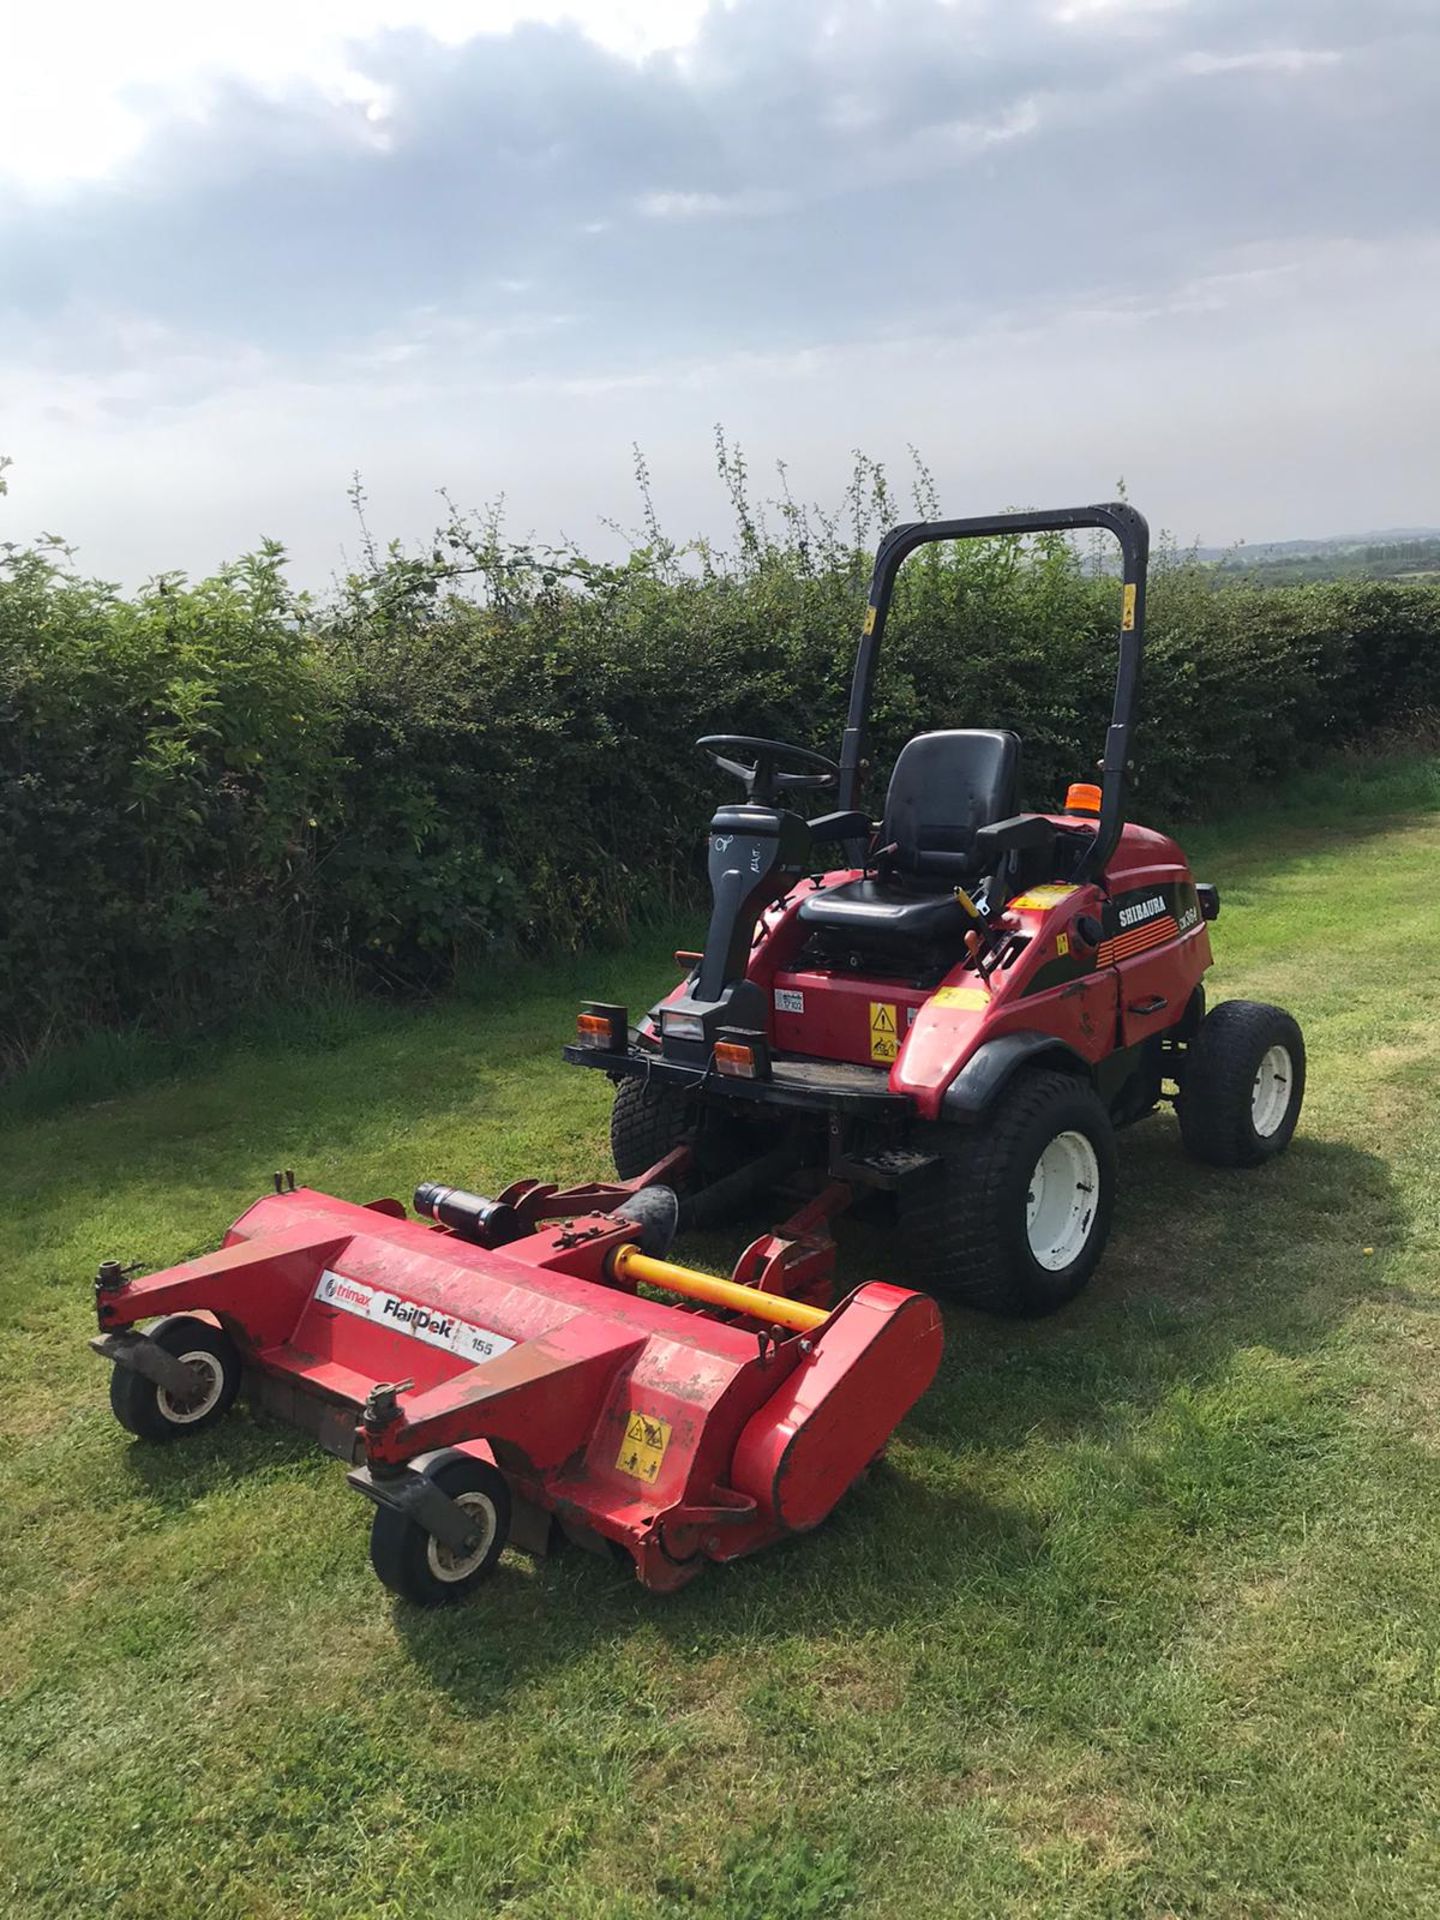 2004 SHIBAURA CM364 RIDE ON LAWN MOWER, RUNS, DRIVES AND CUTS, ROAD LEGAL, 2080 HOURS *PLUS VAT*